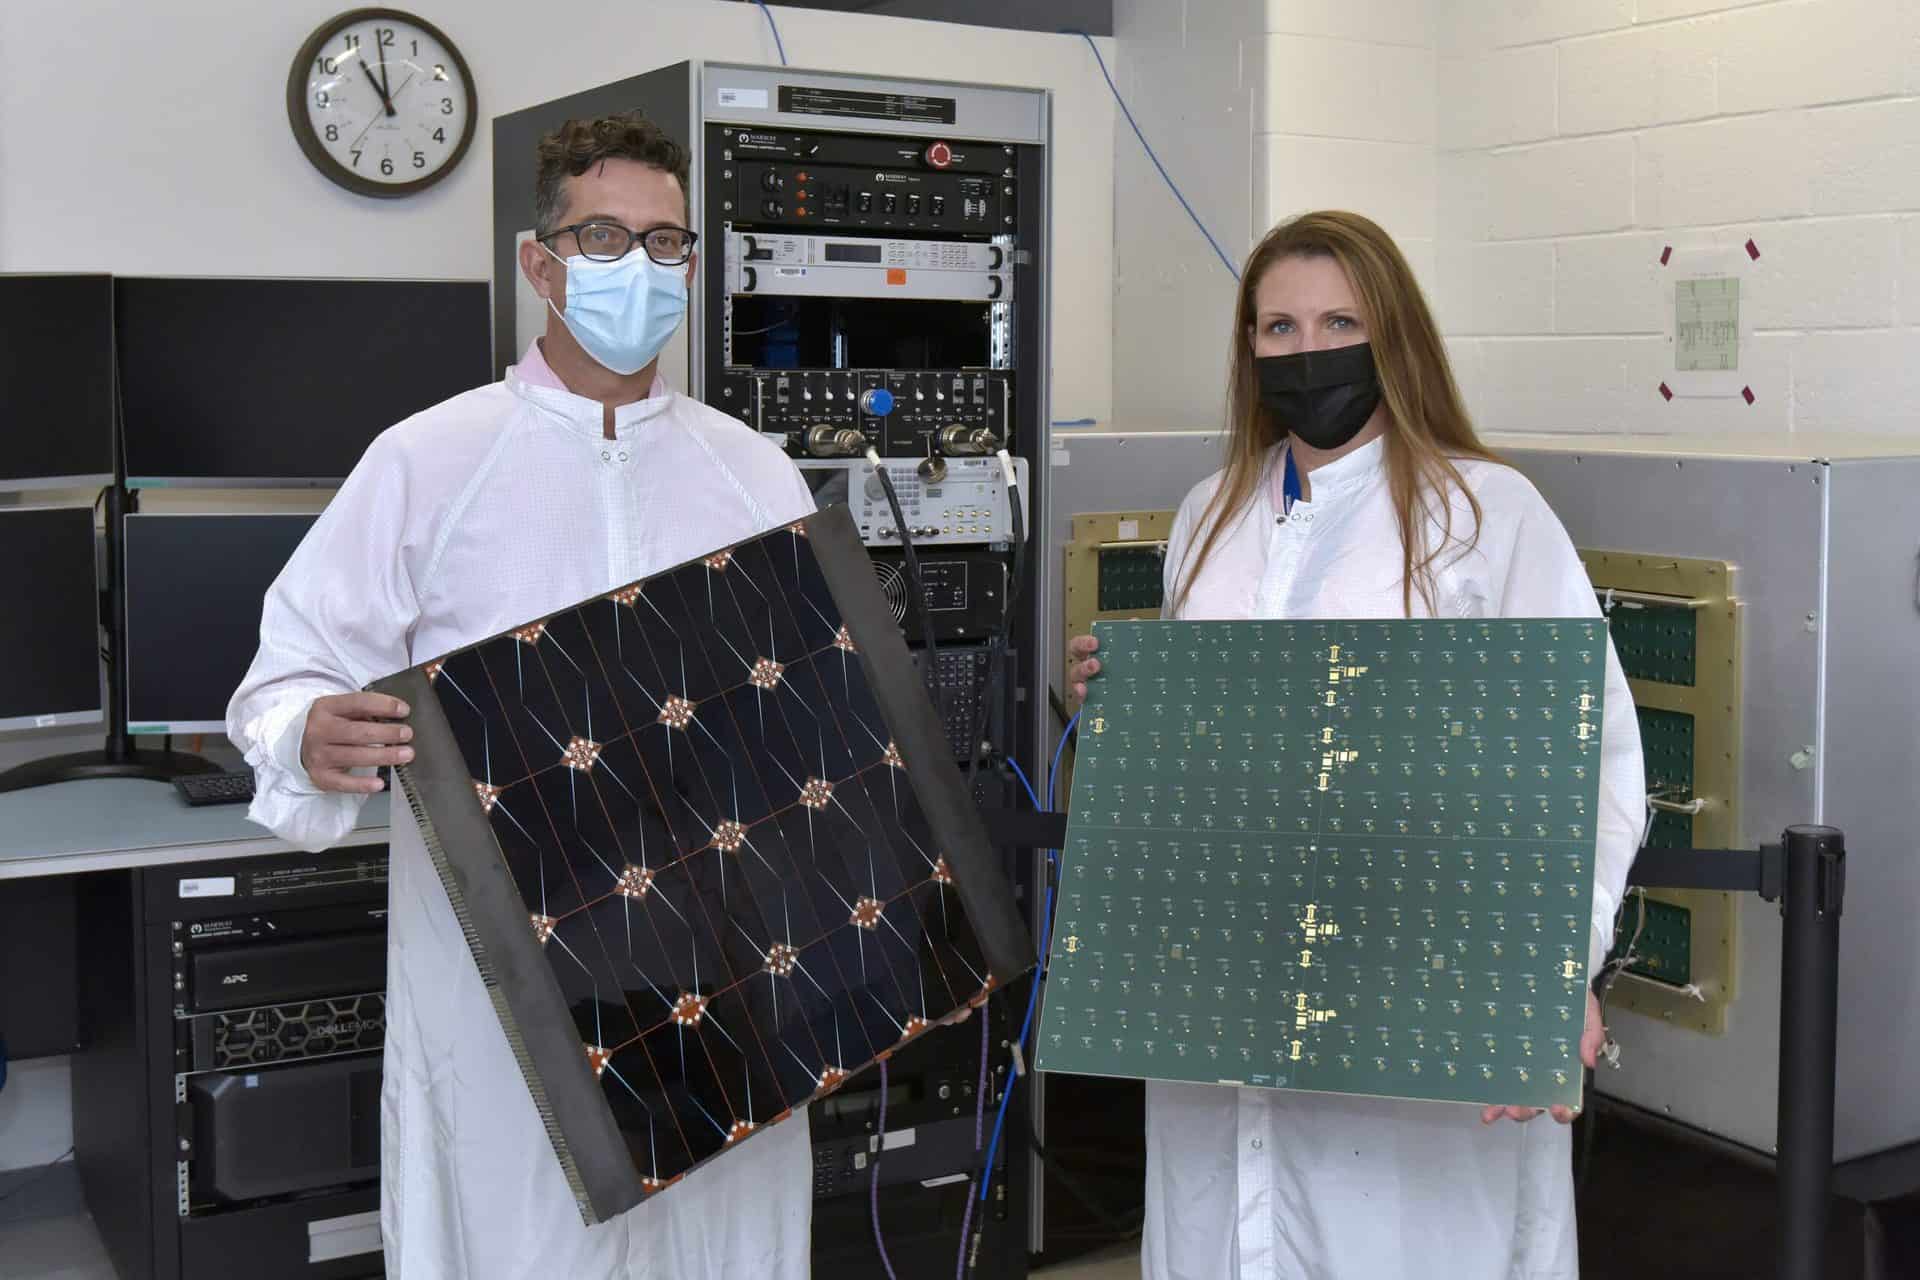 AFRL and Northrop Grumman test key hardware for space-based solar power experiment